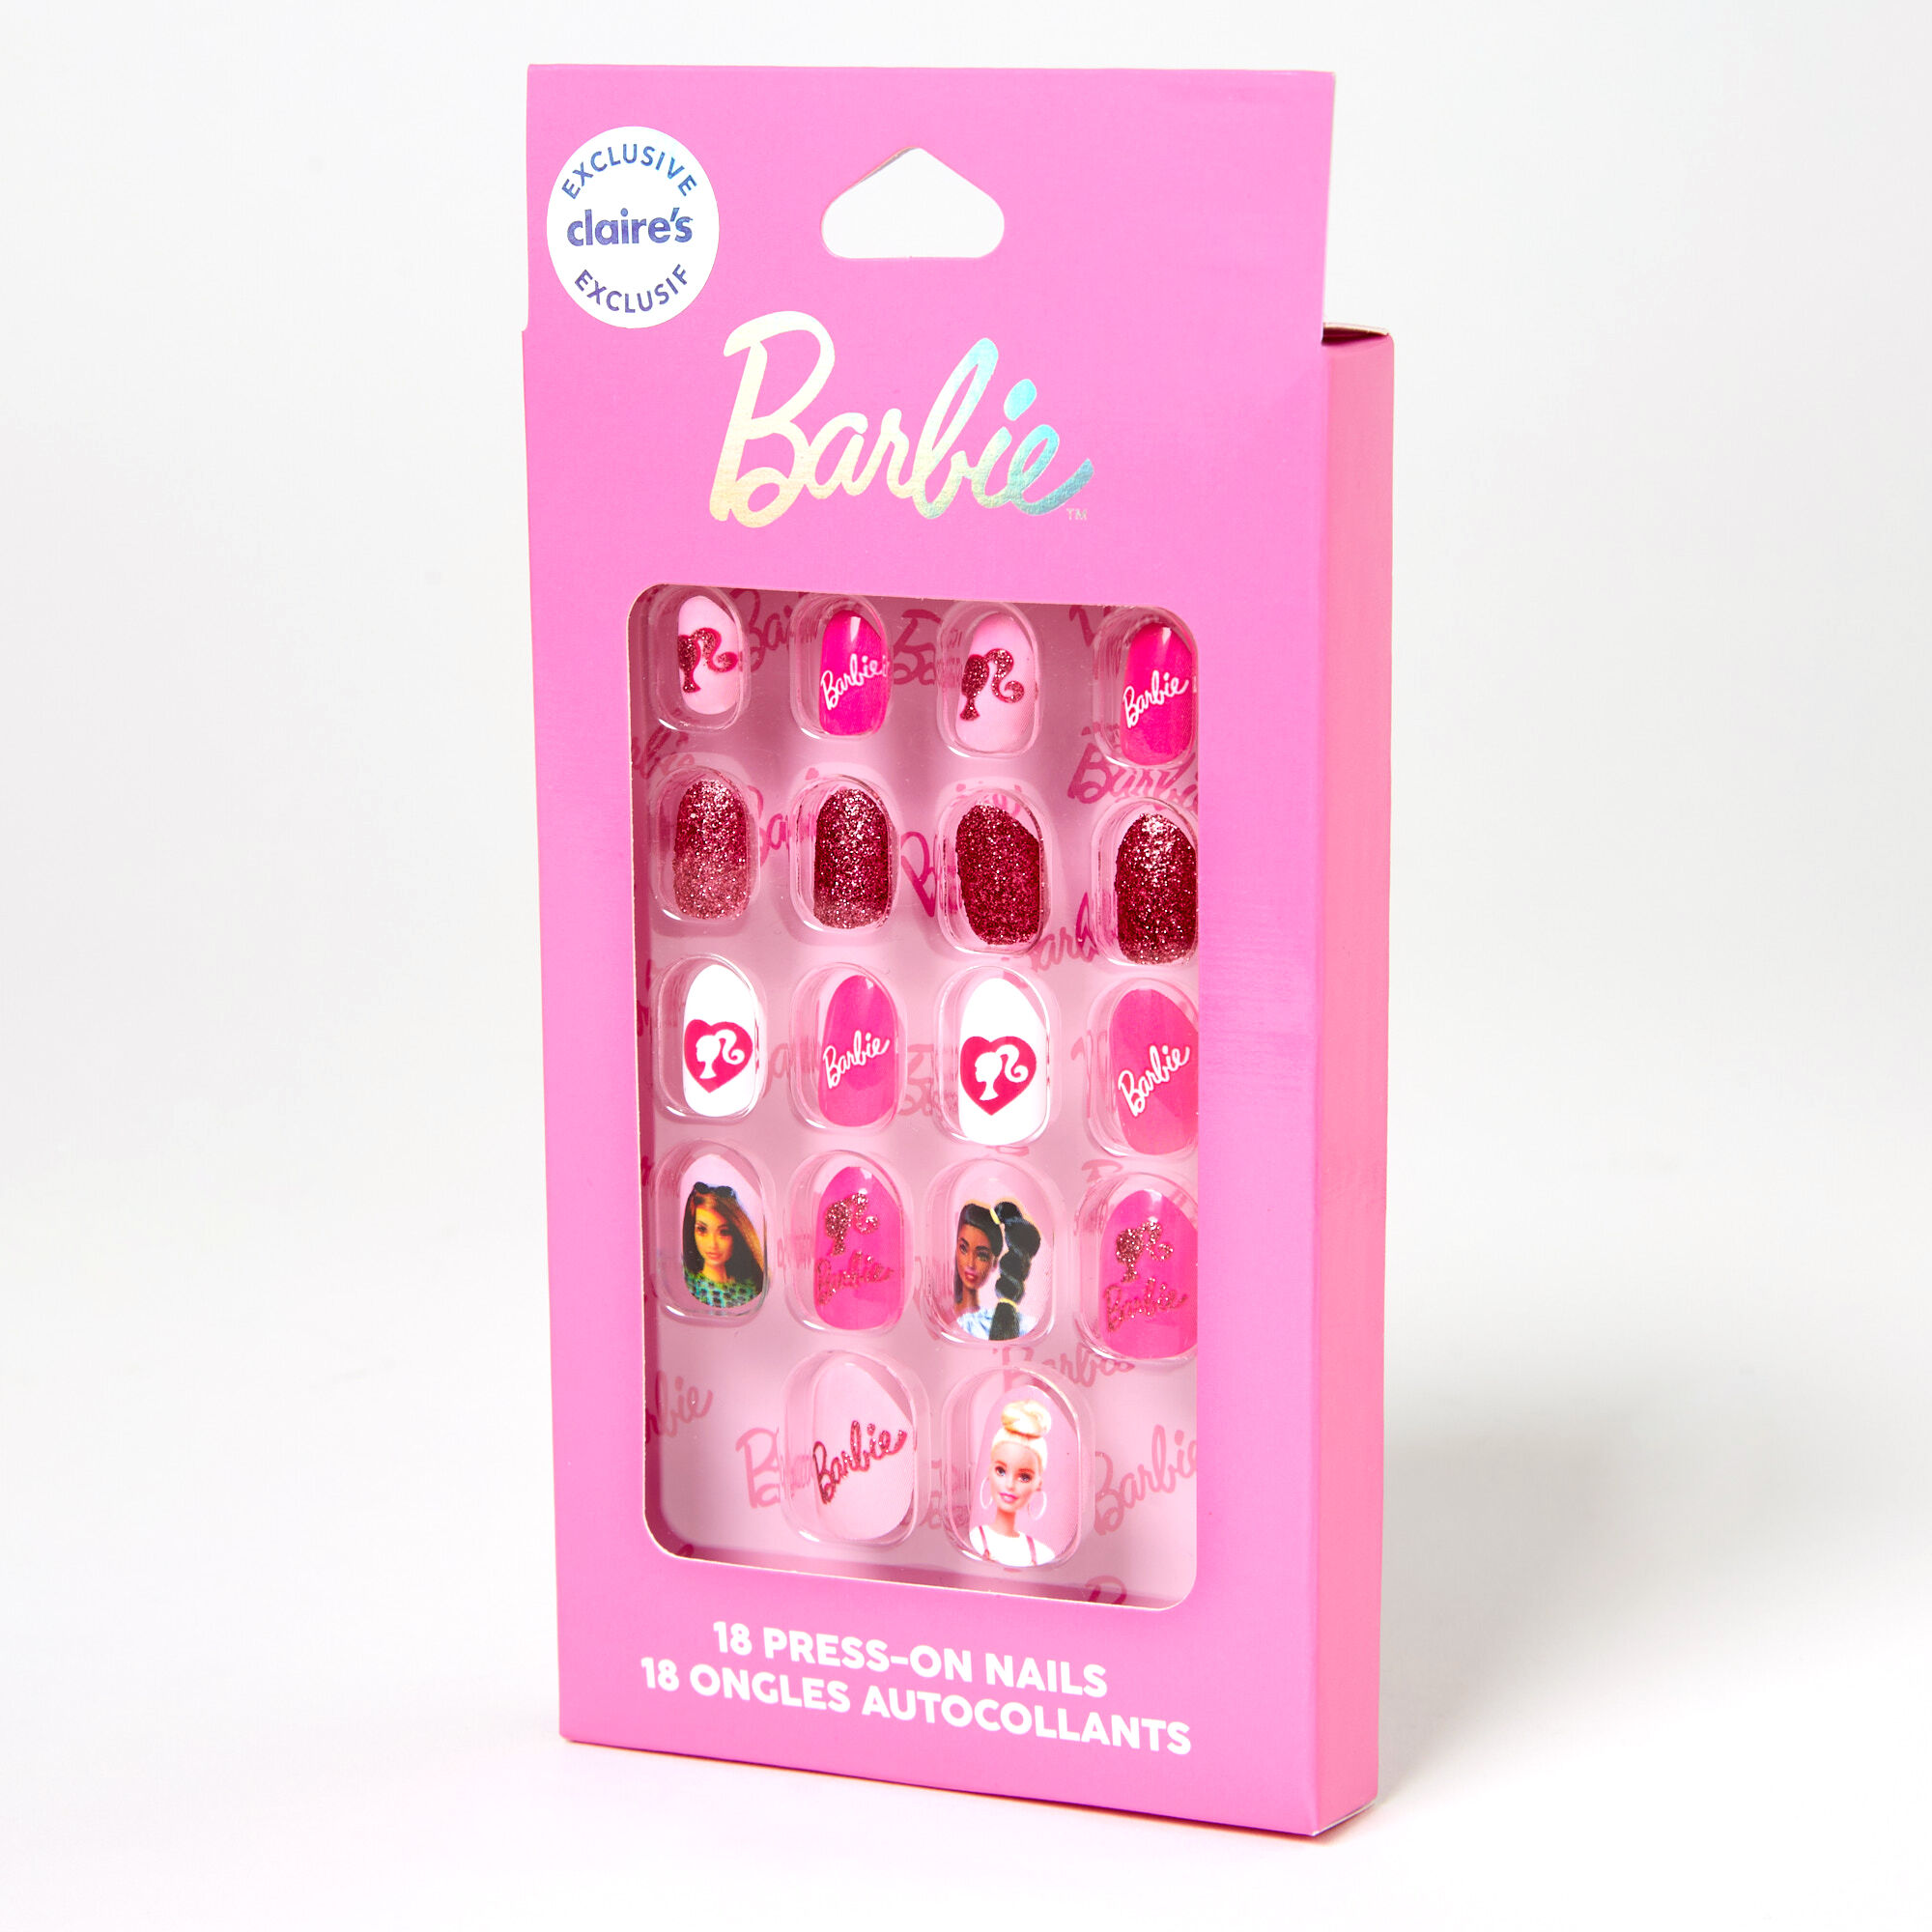 Claires Press On Nails - Shop on Pinterest